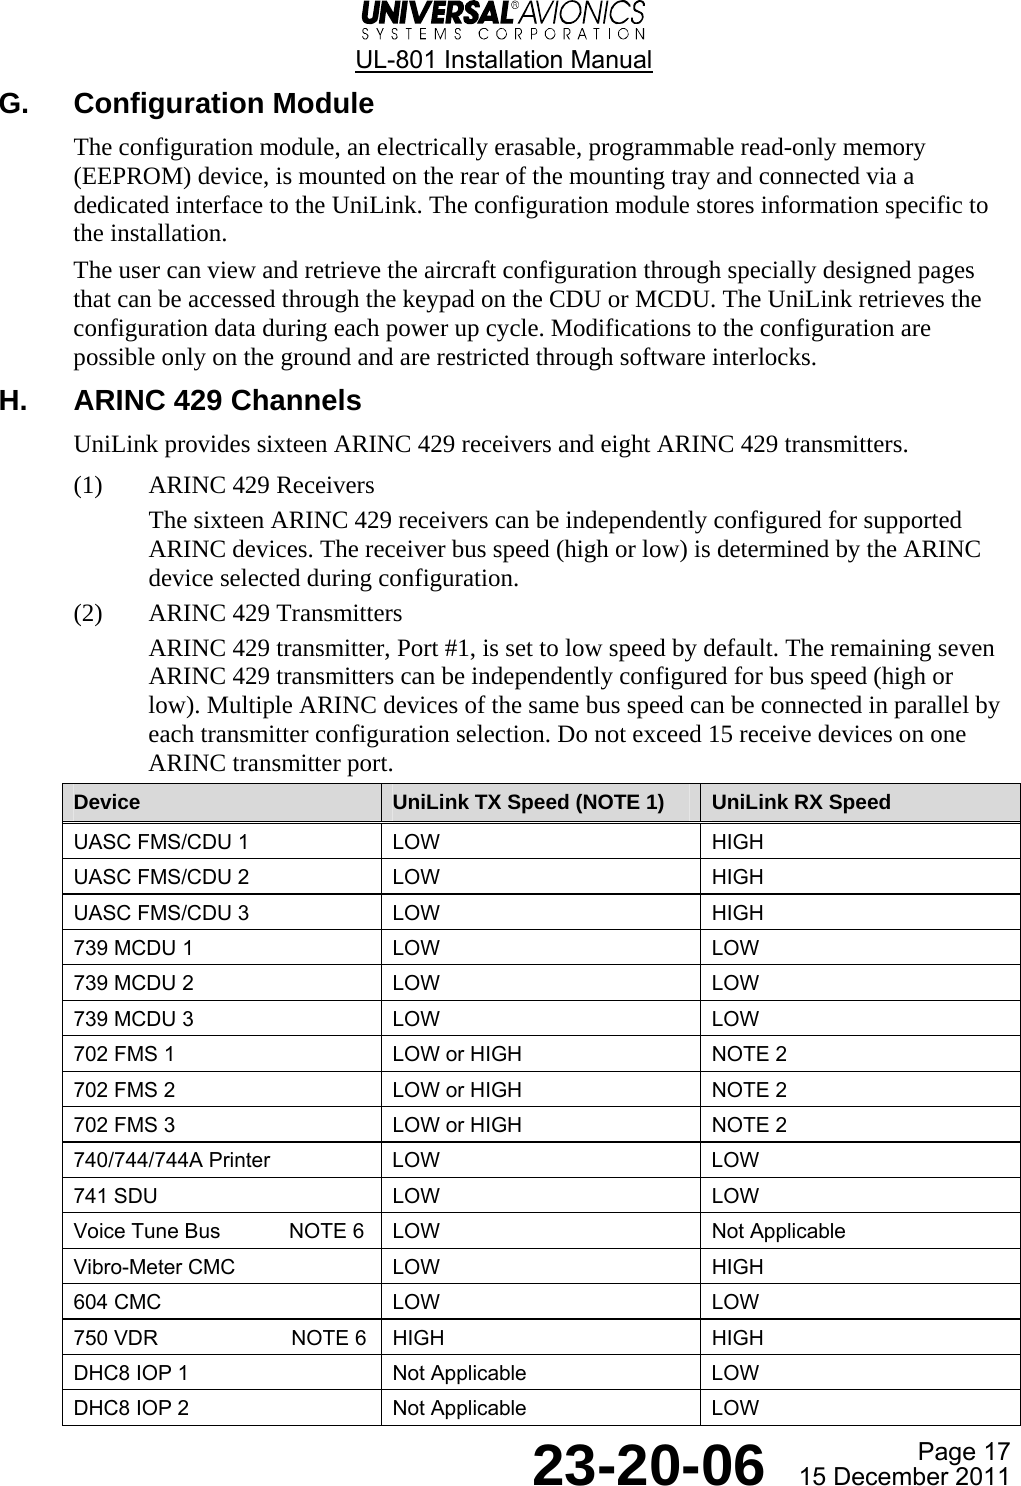  UL-801 Installation Manual  Page 17  23-20-06  15 December 2011 G. Configuration Module The configuration module, an electrically erasable, programmable read-only memory (EEPROM) device, is mounted on the rear of the mounting tray and connected via a dedicated interface to the UniLink. The configuration module stores information specific to the installation. The user can view and retrieve the aircraft configuration through specially designed pages that can be accessed through the keypad on the CDU or MCDU. The UniLink retrieves the configuration data during each power up cycle. Modifications to the configuration are possible only on the ground and are restricted through software interlocks. H.  ARINC 429 Channels UniLink provides sixteen ARINC 429 receivers and eight ARINC 429 transmitters. (1) ARINC 429 Receivers The sixteen ARINC 429 receivers can be independently configured for supported ARINC devices. The receiver bus speed (high or low) is determined by the ARINC device selected during configuration. (2) ARINC 429 Transmitters ARINC 429 transmitter, Port #1, is set to low speed by default. The remaining seven ARINC 429 transmitters can be independently configured for bus speed (high or low). Multiple ARINC devices of the same bus speed can be connected in parallel by each transmitter configuration selection. Do not exceed 15 receive devices on one ARINC transmitter port. Device  UniLink TX Speed (NOTE 1)  UniLink RX Speed UASC FMS/CDU 1  LOW  HIGH UASC FMS/CDU 2  LOW  HIGH UASC FMS/CDU 3  LOW  HIGH 739 MCDU 1  LOW  LOW 739 MCDU 2  LOW  LOW 739 MCDU 3  LOW  LOW 702 FMS 1   LOW or HIGH  NOTE 2 702 FMS 2  LOW or HIGH  NOTE 2 702 FMS 3  LOW or HIGH  NOTE 2 740/744/744A Printer  LOW  LOW 741 SDU  LOW  LOW Voice Tune Bus  NOTE 6  LOW  Not Applicable Vibro-Meter CMC  LOW  HIGH 604 CMC  LOW  LOW 750 VDR   NOTE 6  HIGH  HIGH DHC8 IOP 1  Not Applicable  LOW DHC8 IOP 2  Not Applicable  LOW  